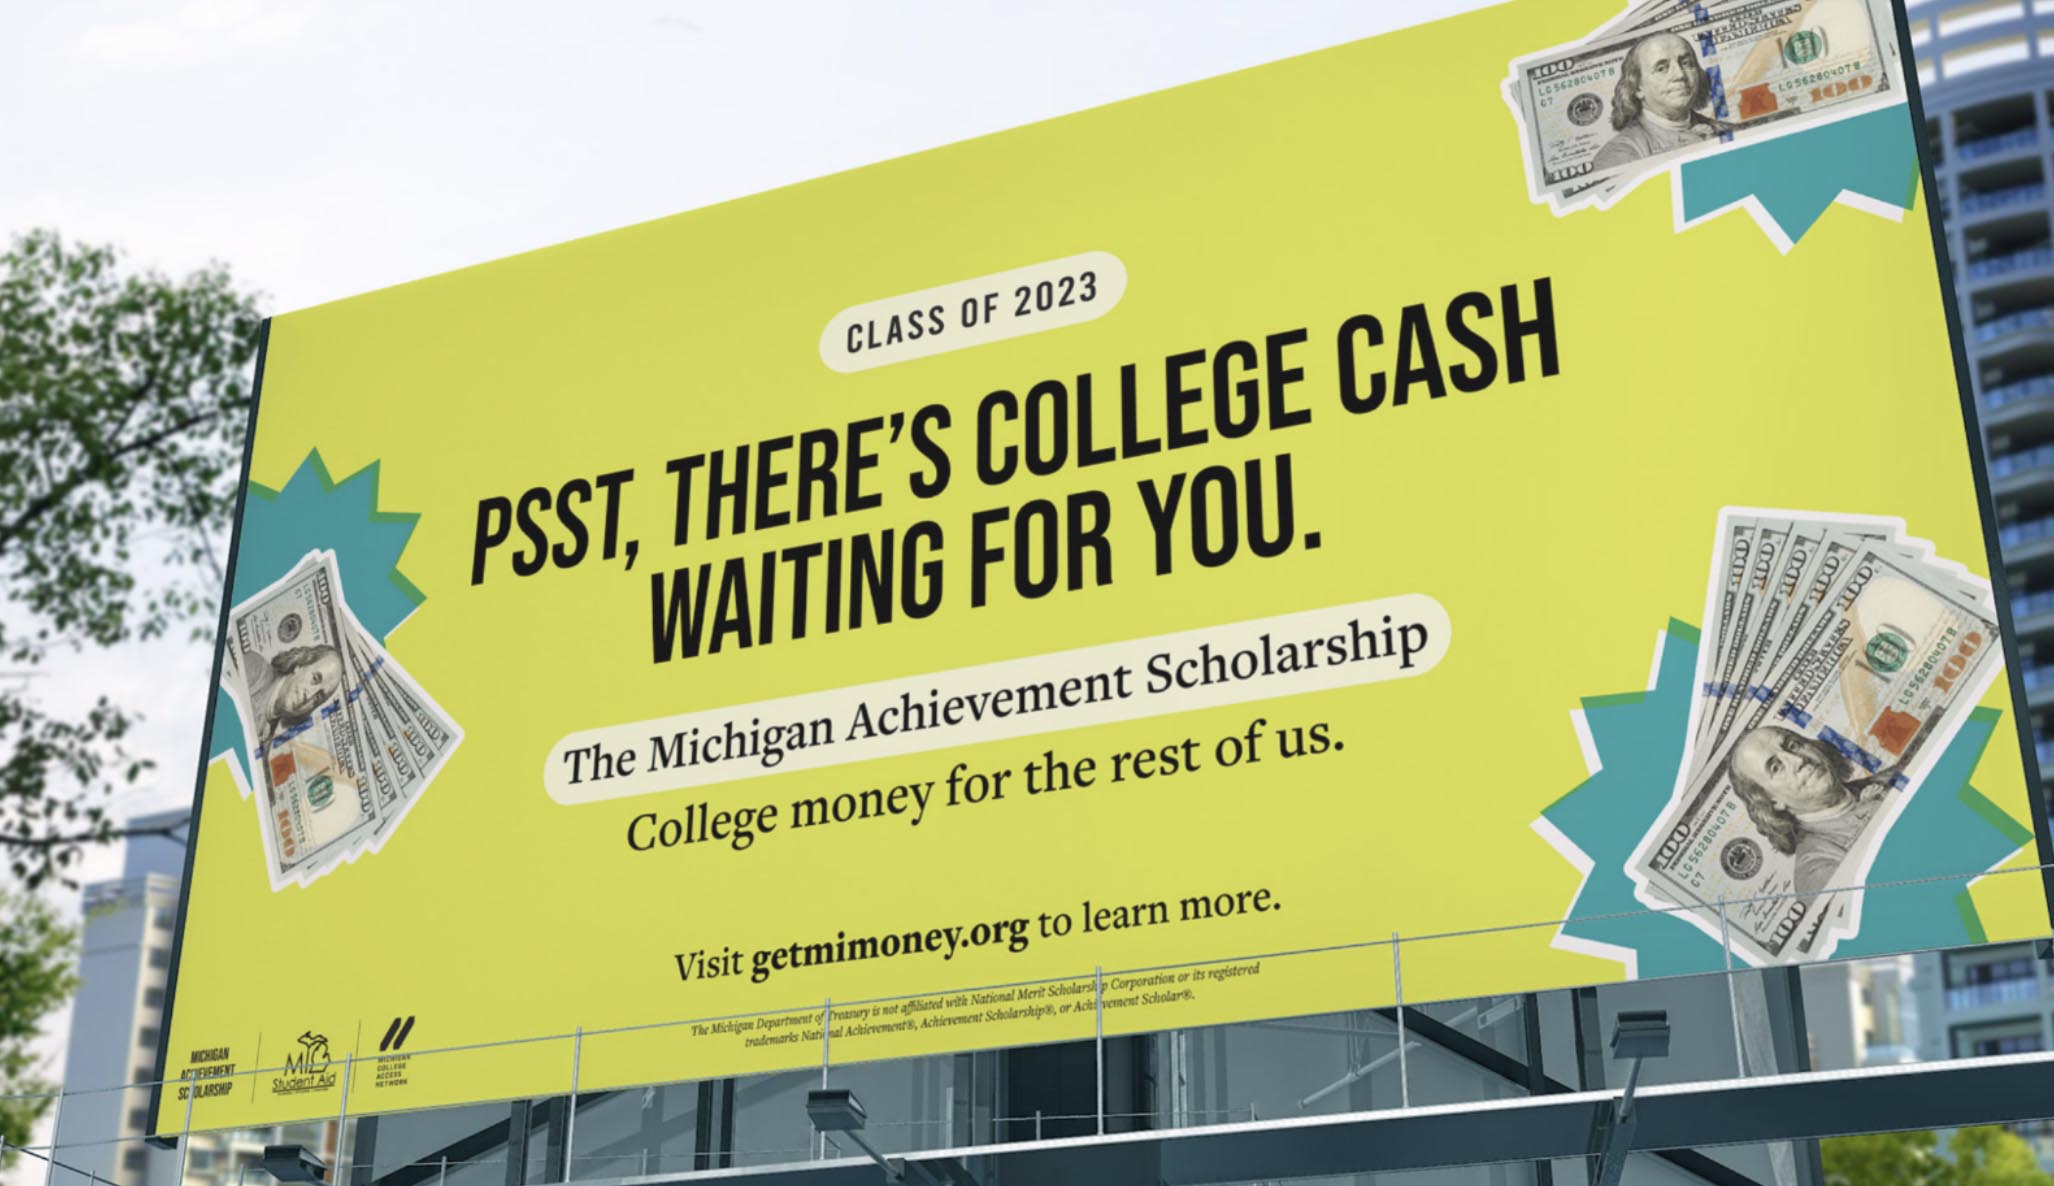 A billboard for the Michigan Achievement Scholarship reads "Psst, there's college cash waiting for you" in black text on a green background.